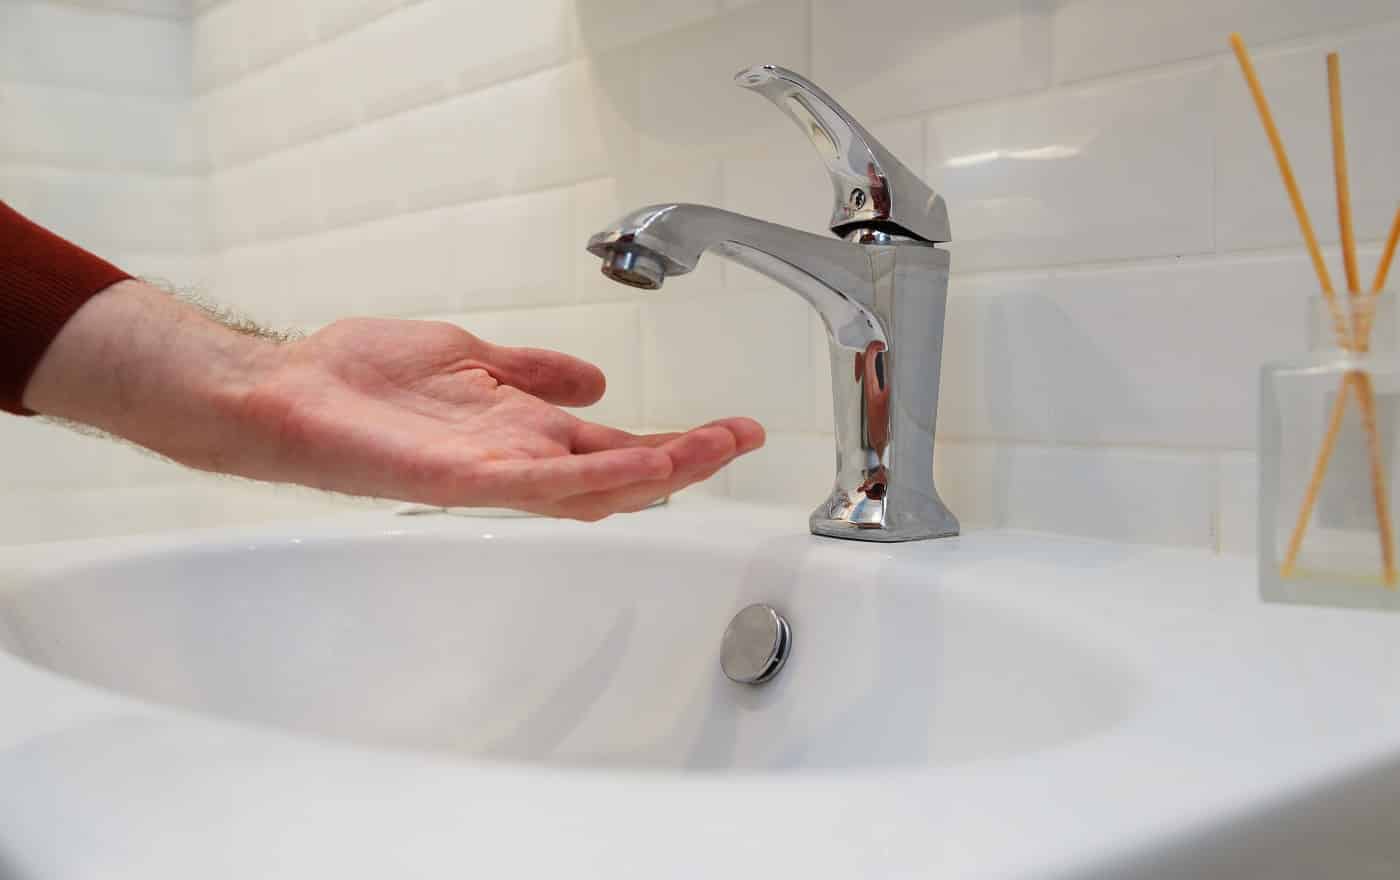 Man holding his hand under opened tap without water. Shutdown of water supply for non-payment or during repair work of the central system